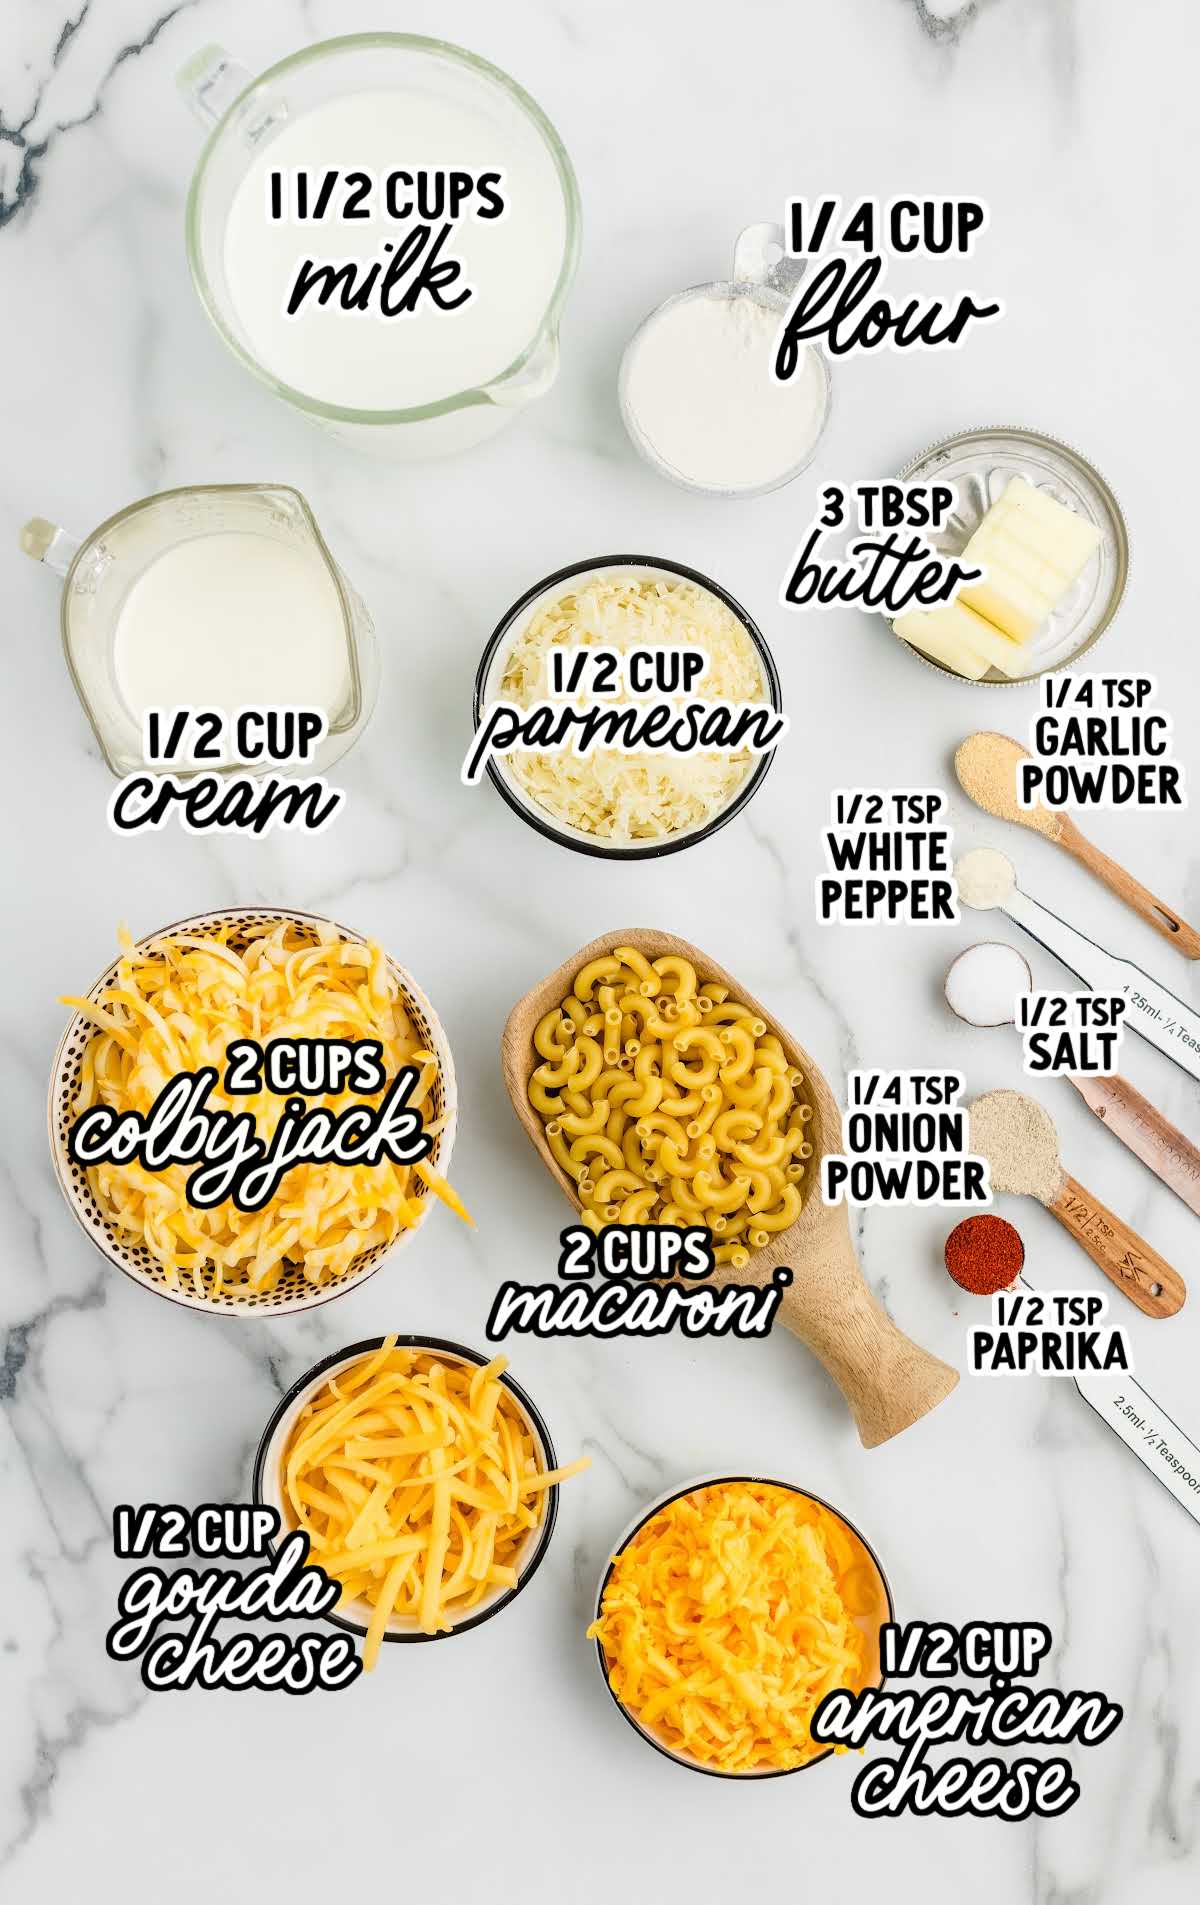 Chick Fil A Mac And Cheese Recipe raw ingredients that are labeled